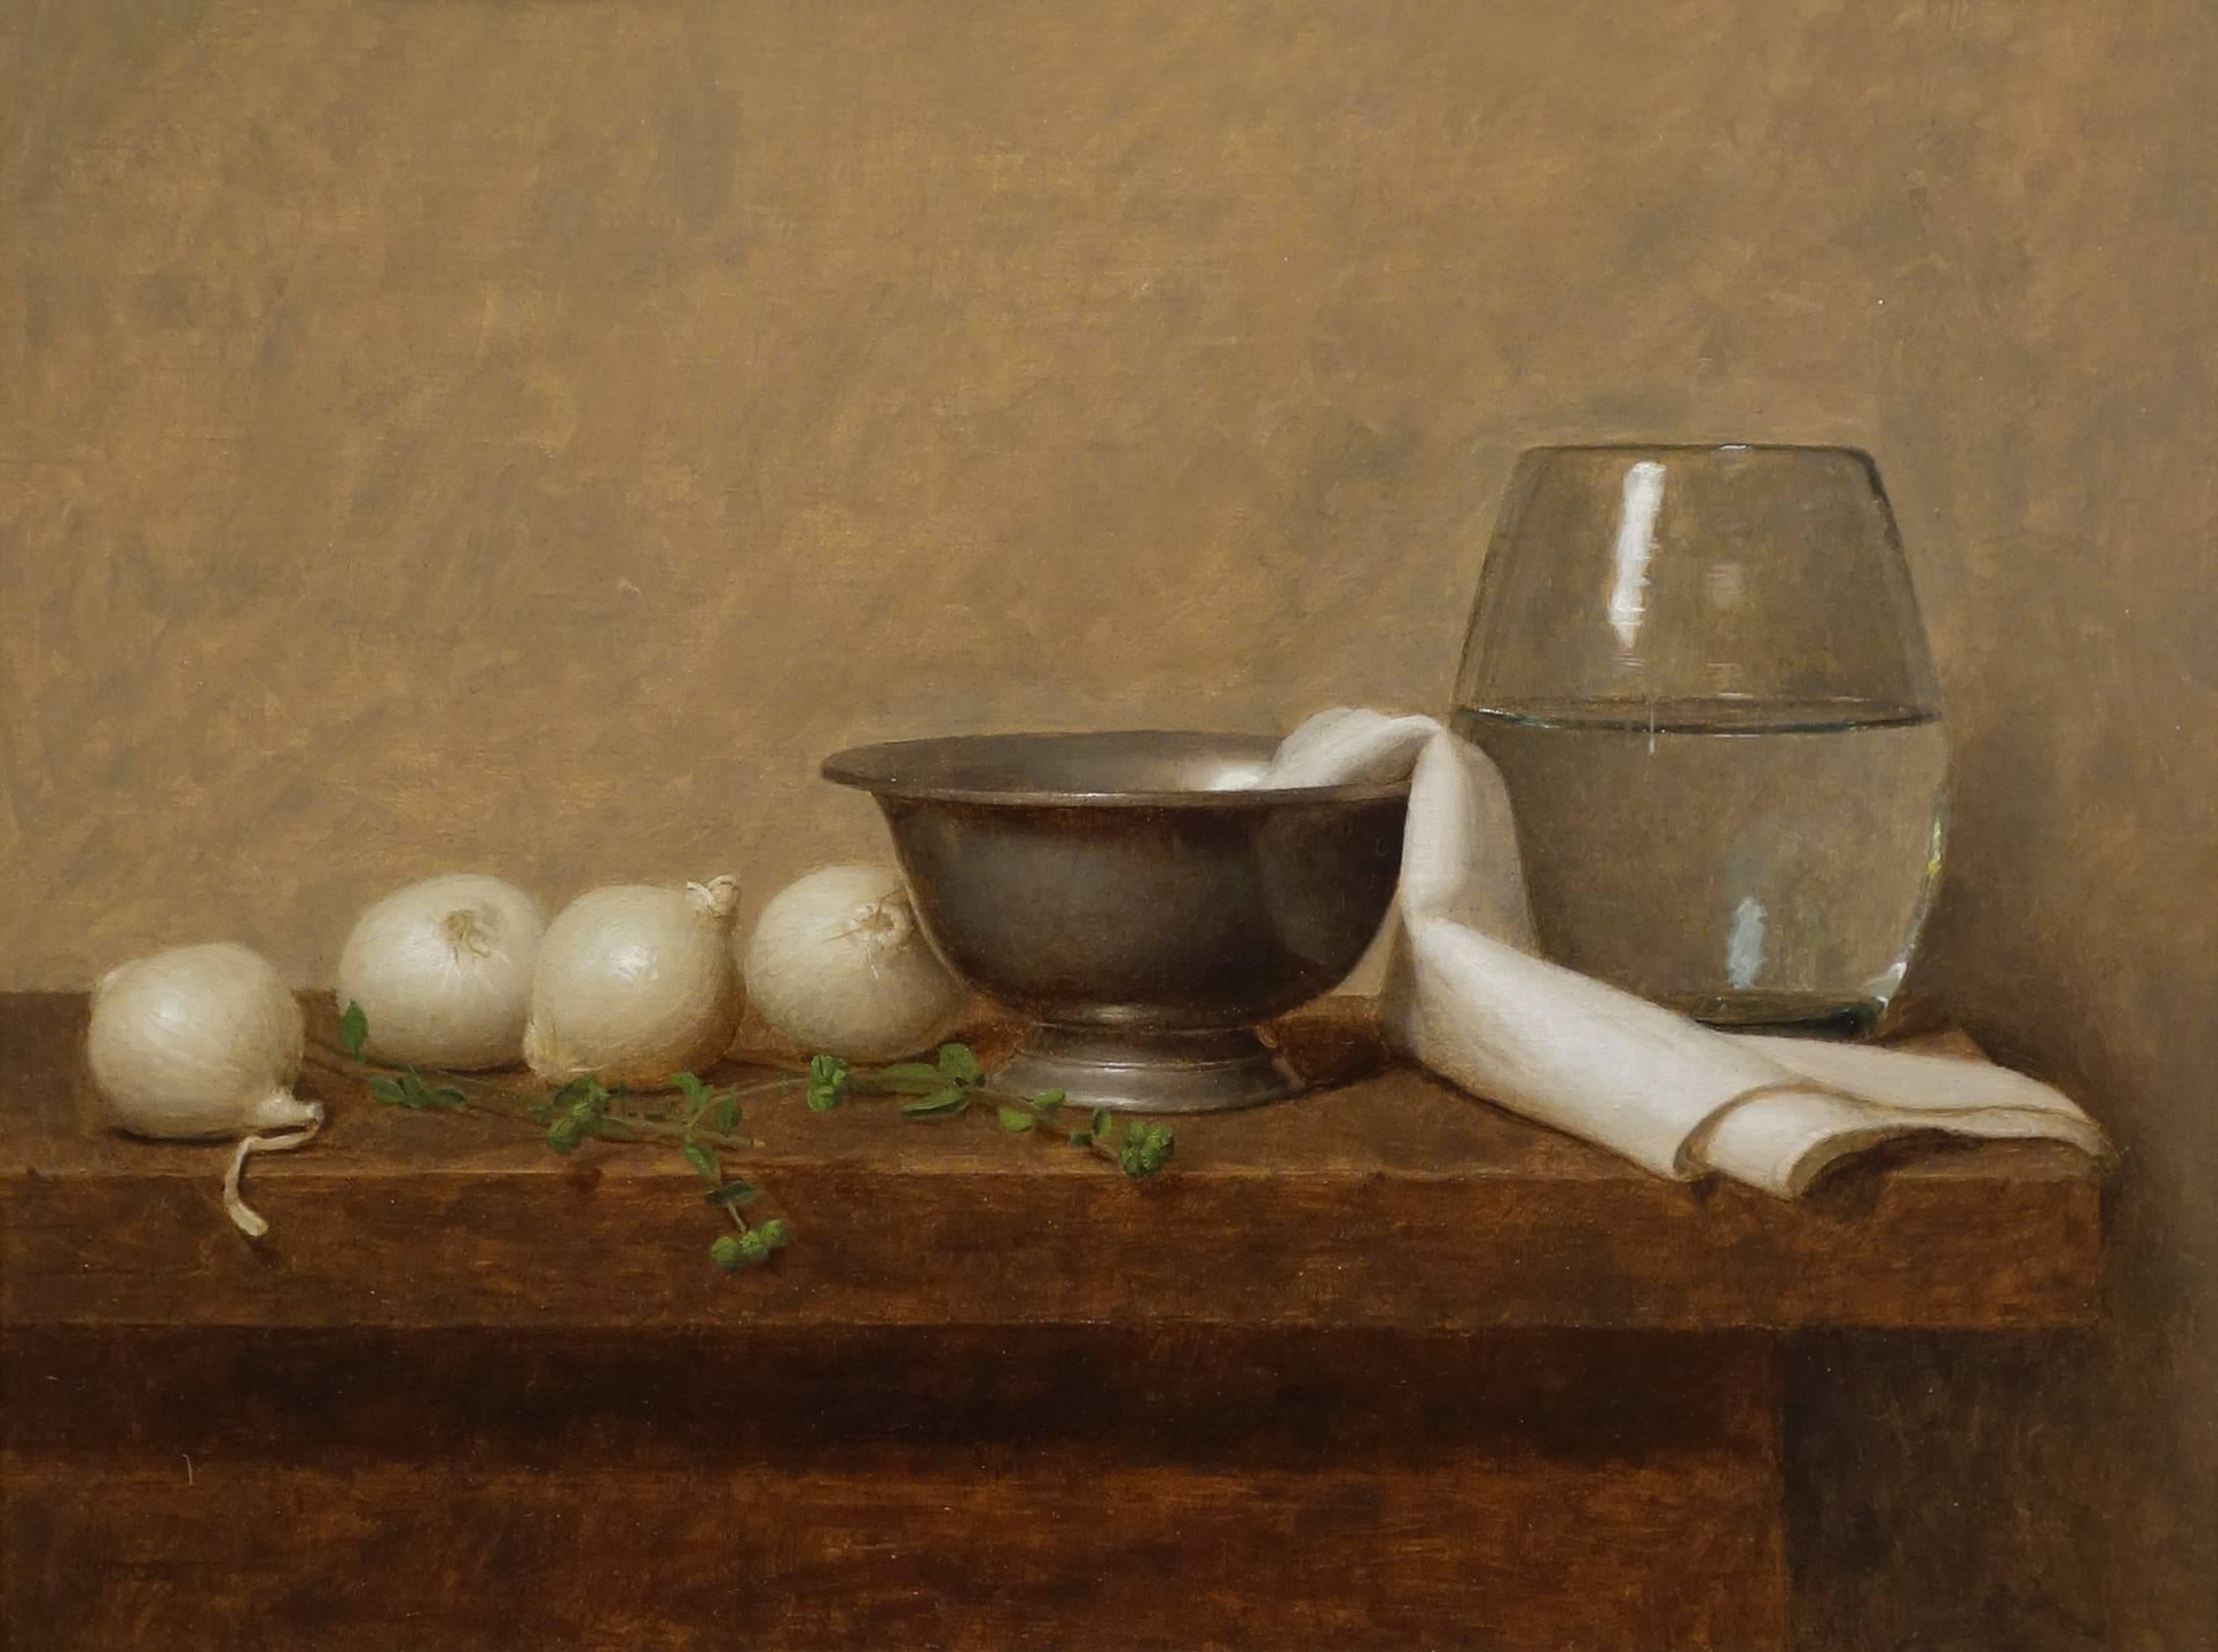 Justin Wood Still-Life Painting - STILL LIFE WITH WHITE ONIONS AND OREGANO, photo-realism, still-life, ingredients